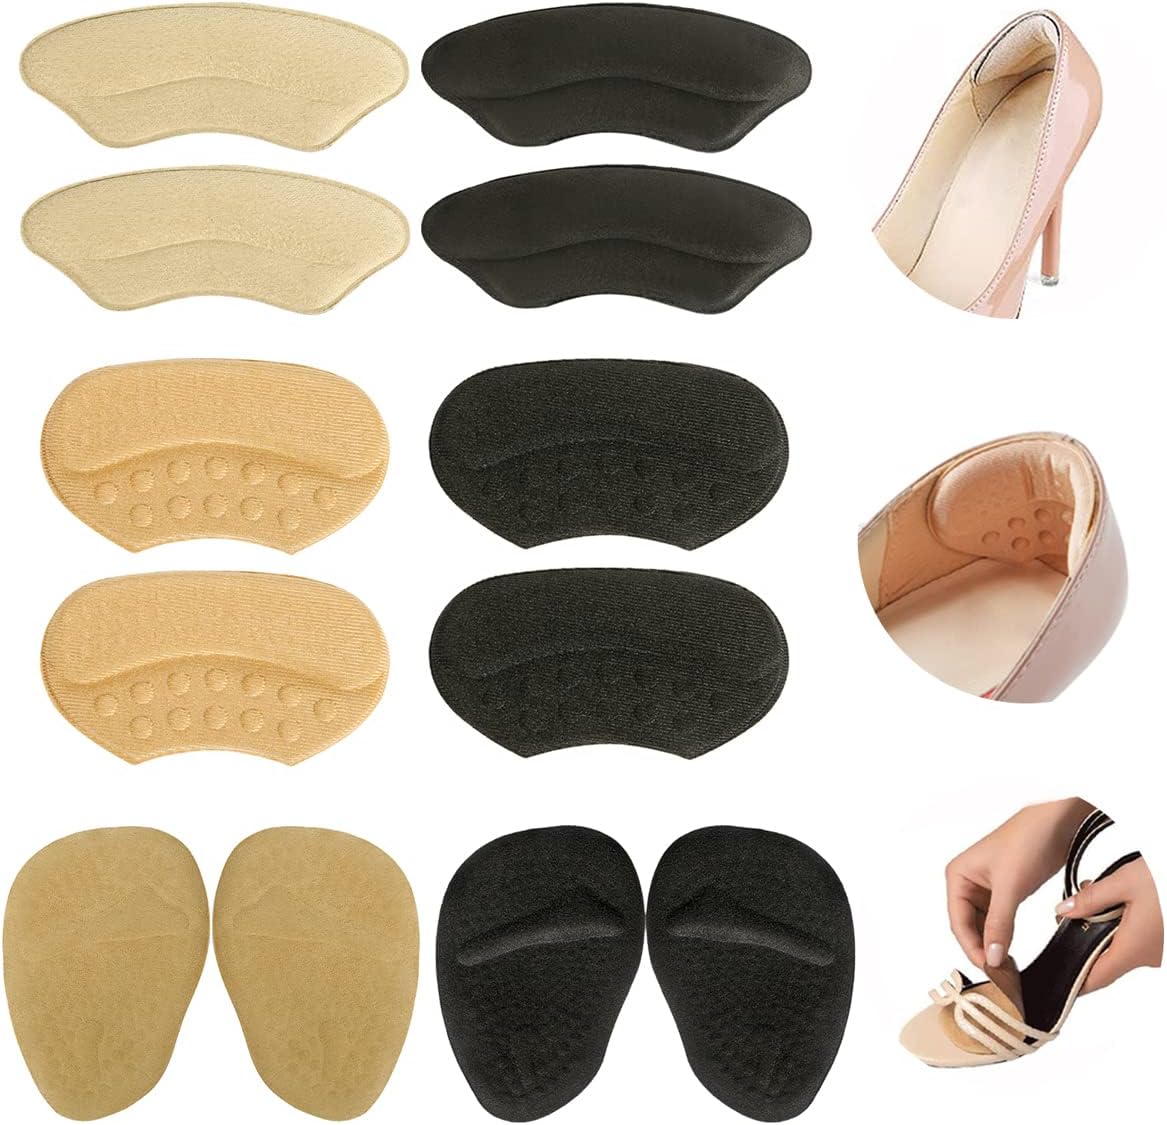 Heel Grips Liner Cushions Inserts for Loose Shoes Heel [...]